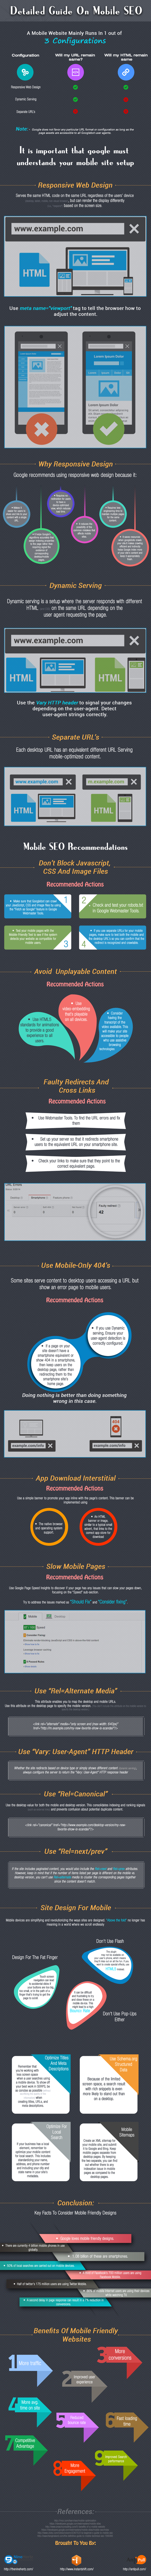 Detailed-Guide-on-Mobile-SEO-Insta